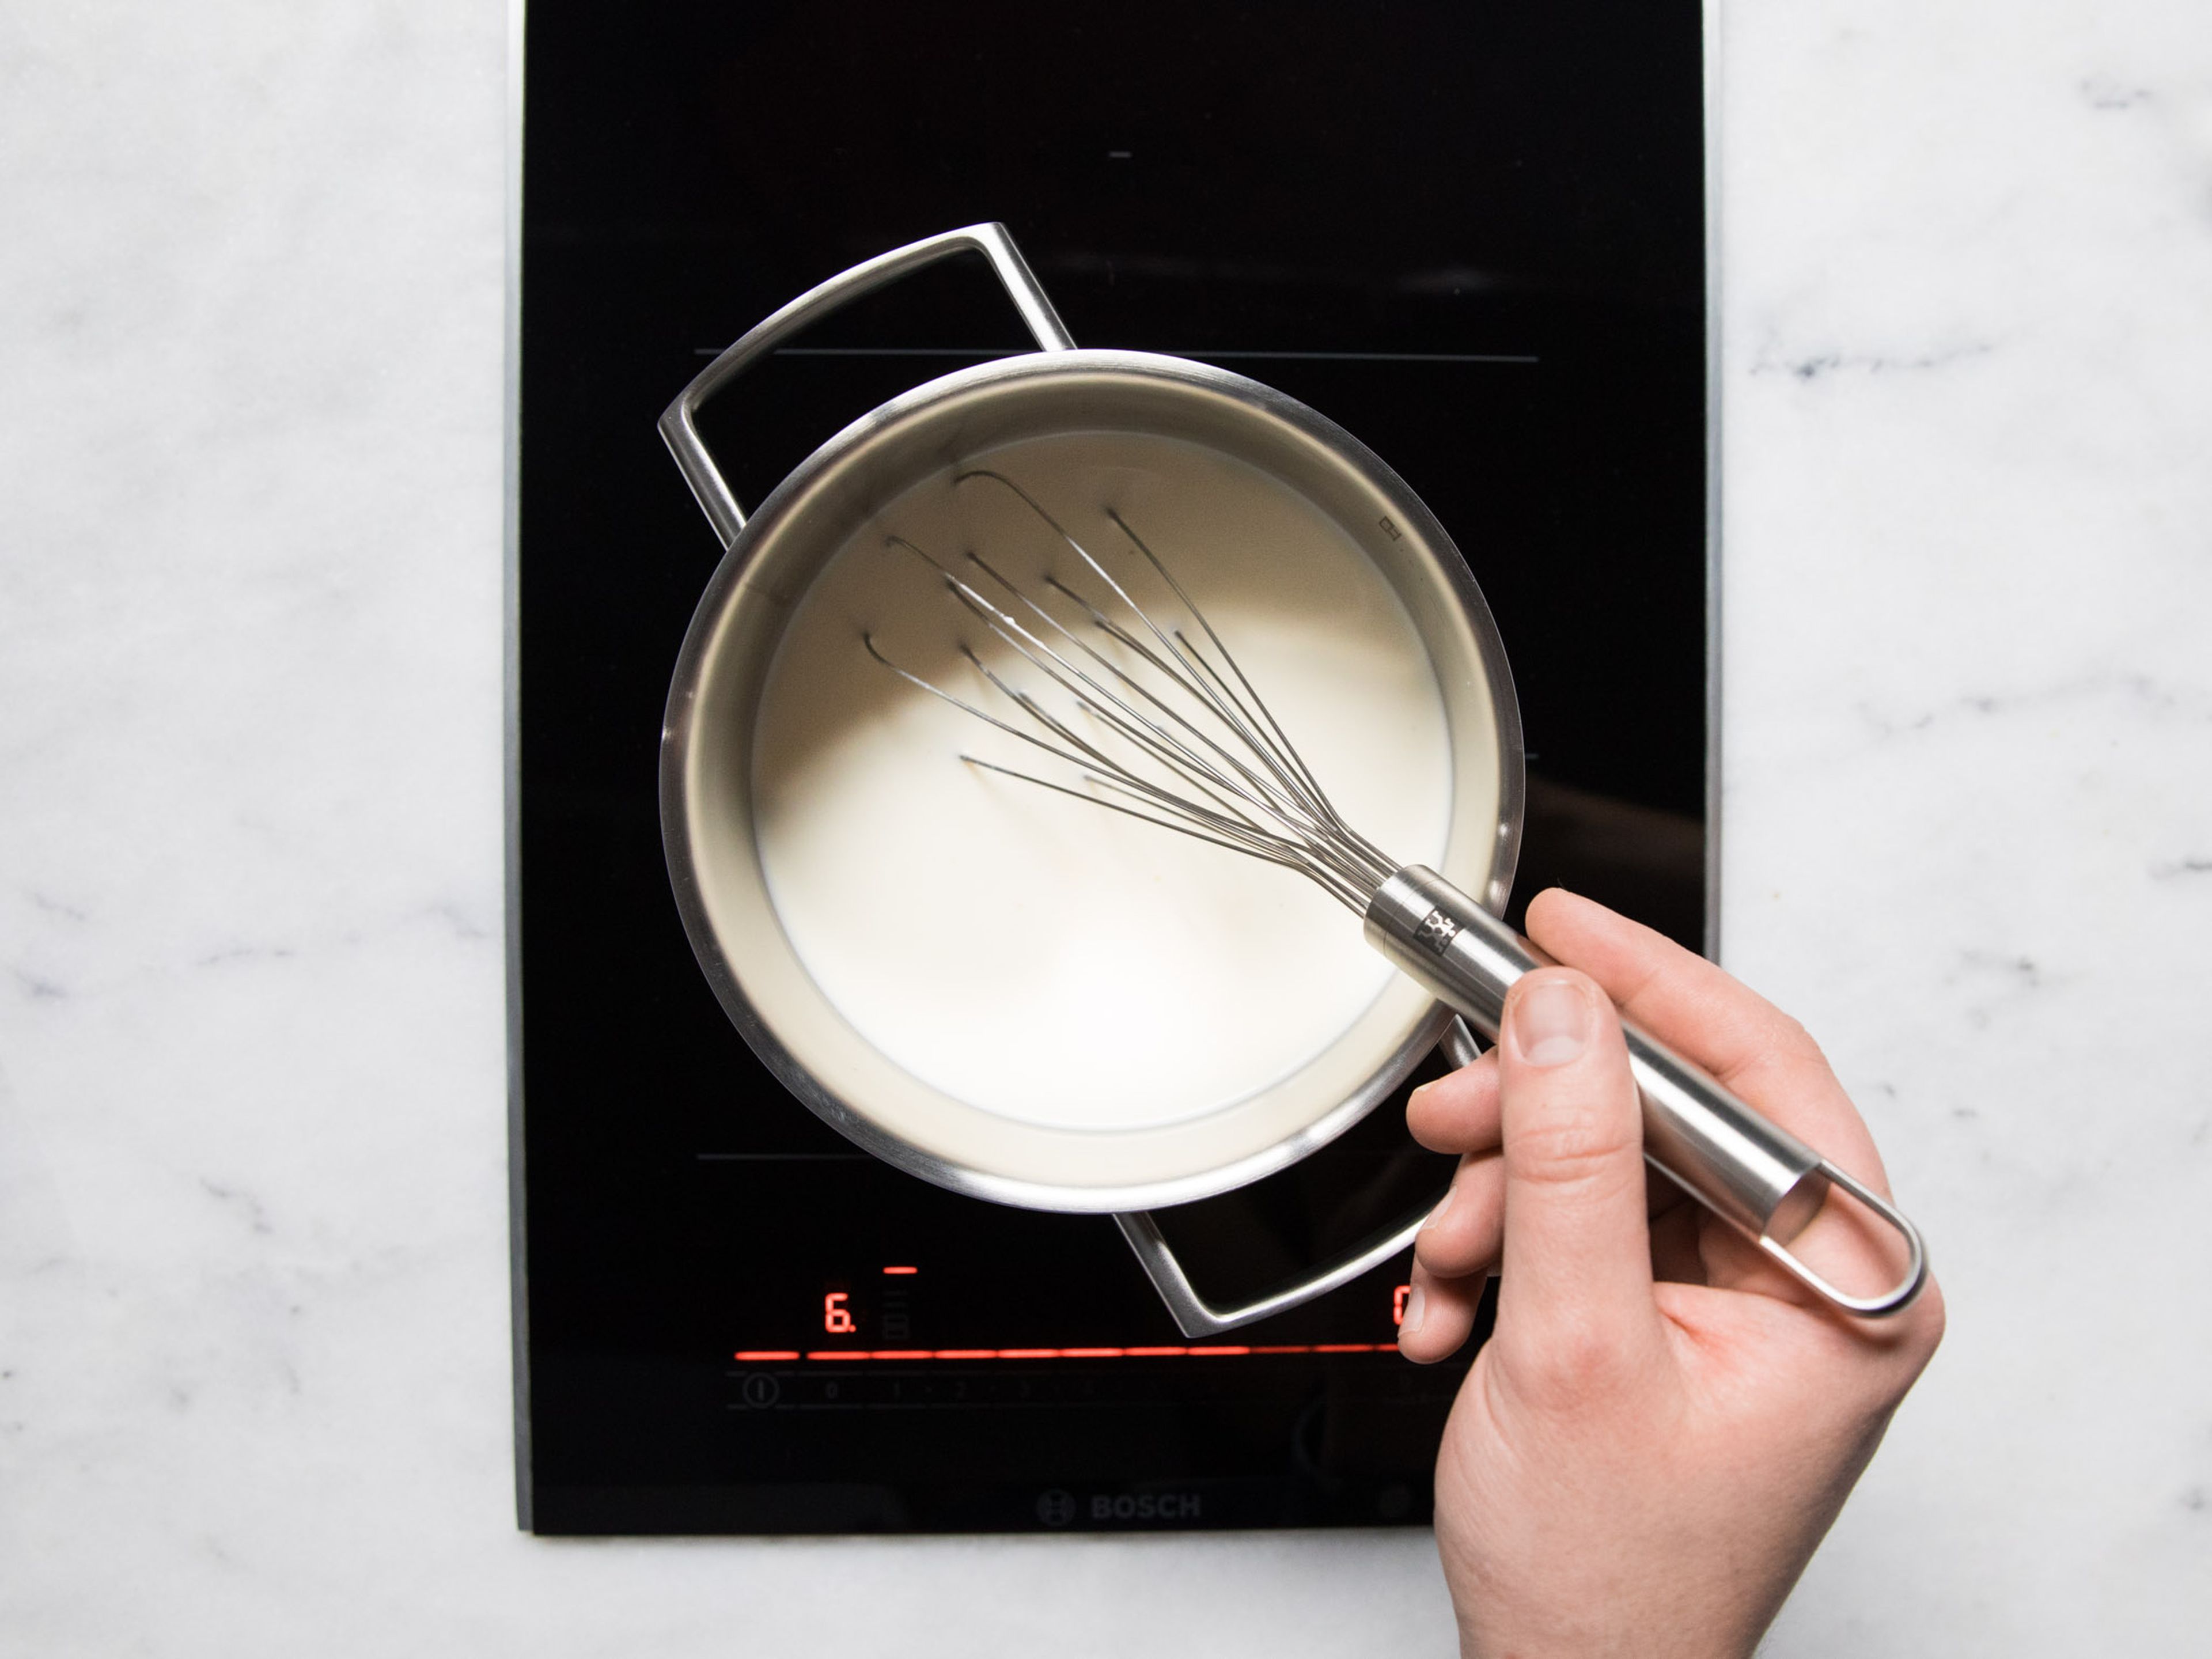 Add remaining milk, sugar, and heavy cream to a pot over medium heat and stir to combine. Stir in milk and starch mixture and heat until the mixture thickens. Stir constantly to prevent any lumps from forming.